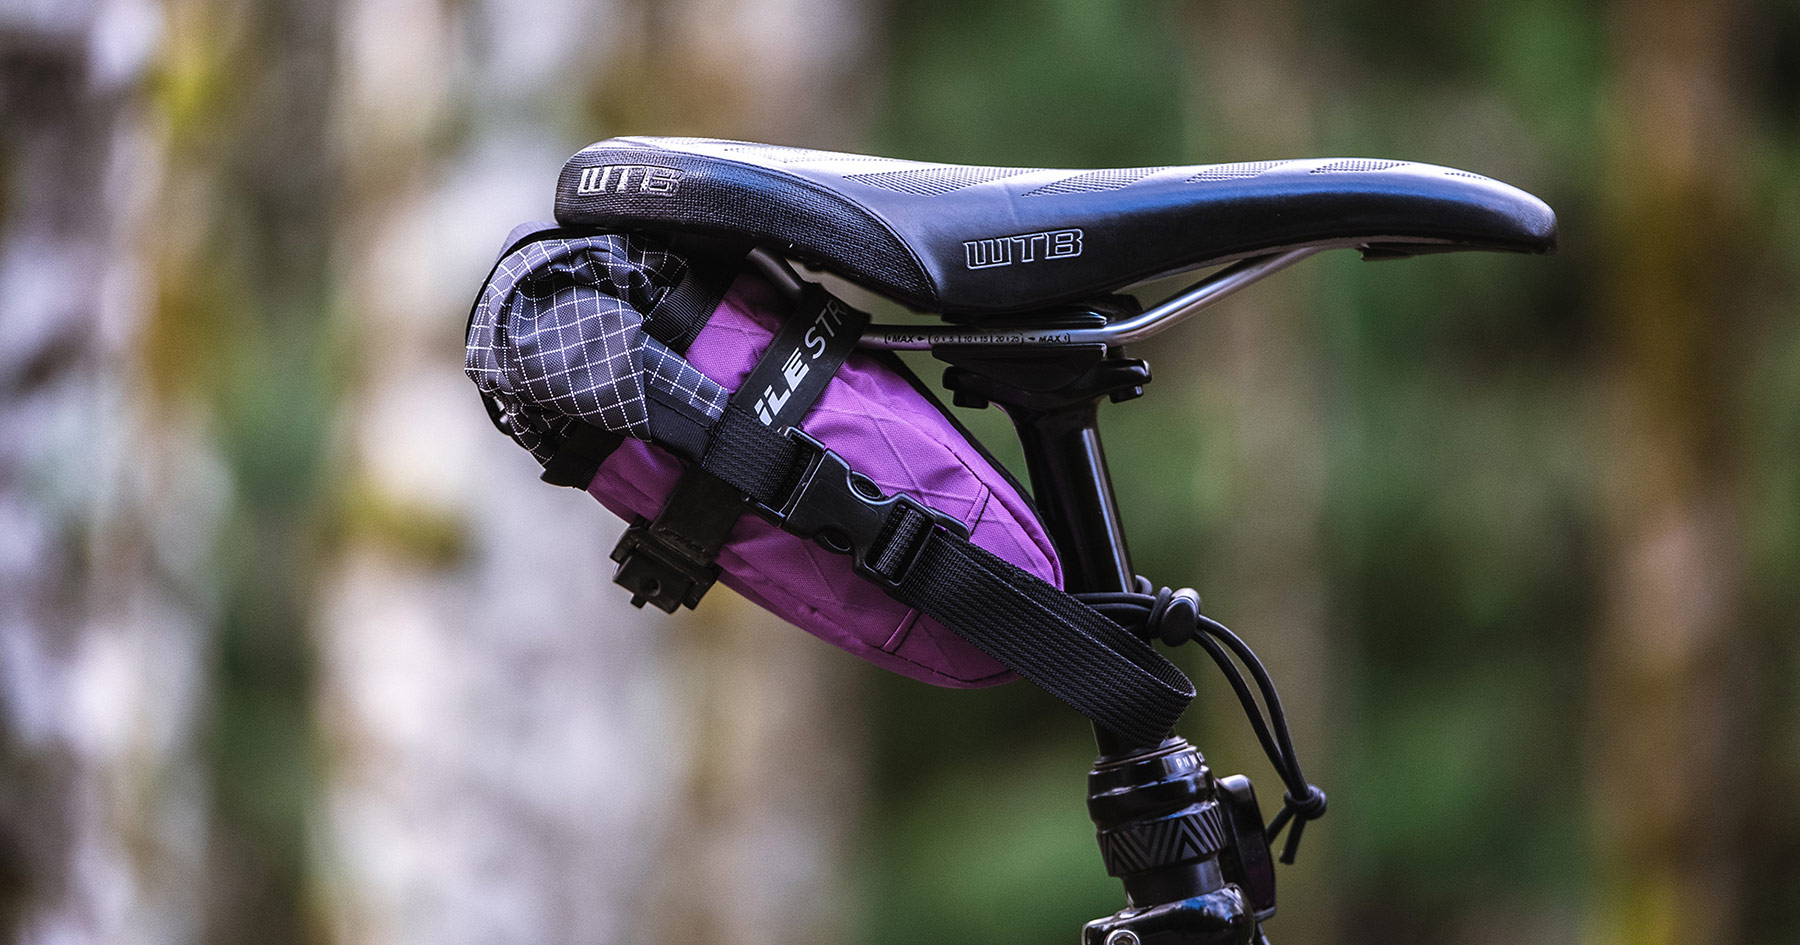 Swift Industries' New Every Day Caddy - BIKEPACKING.com